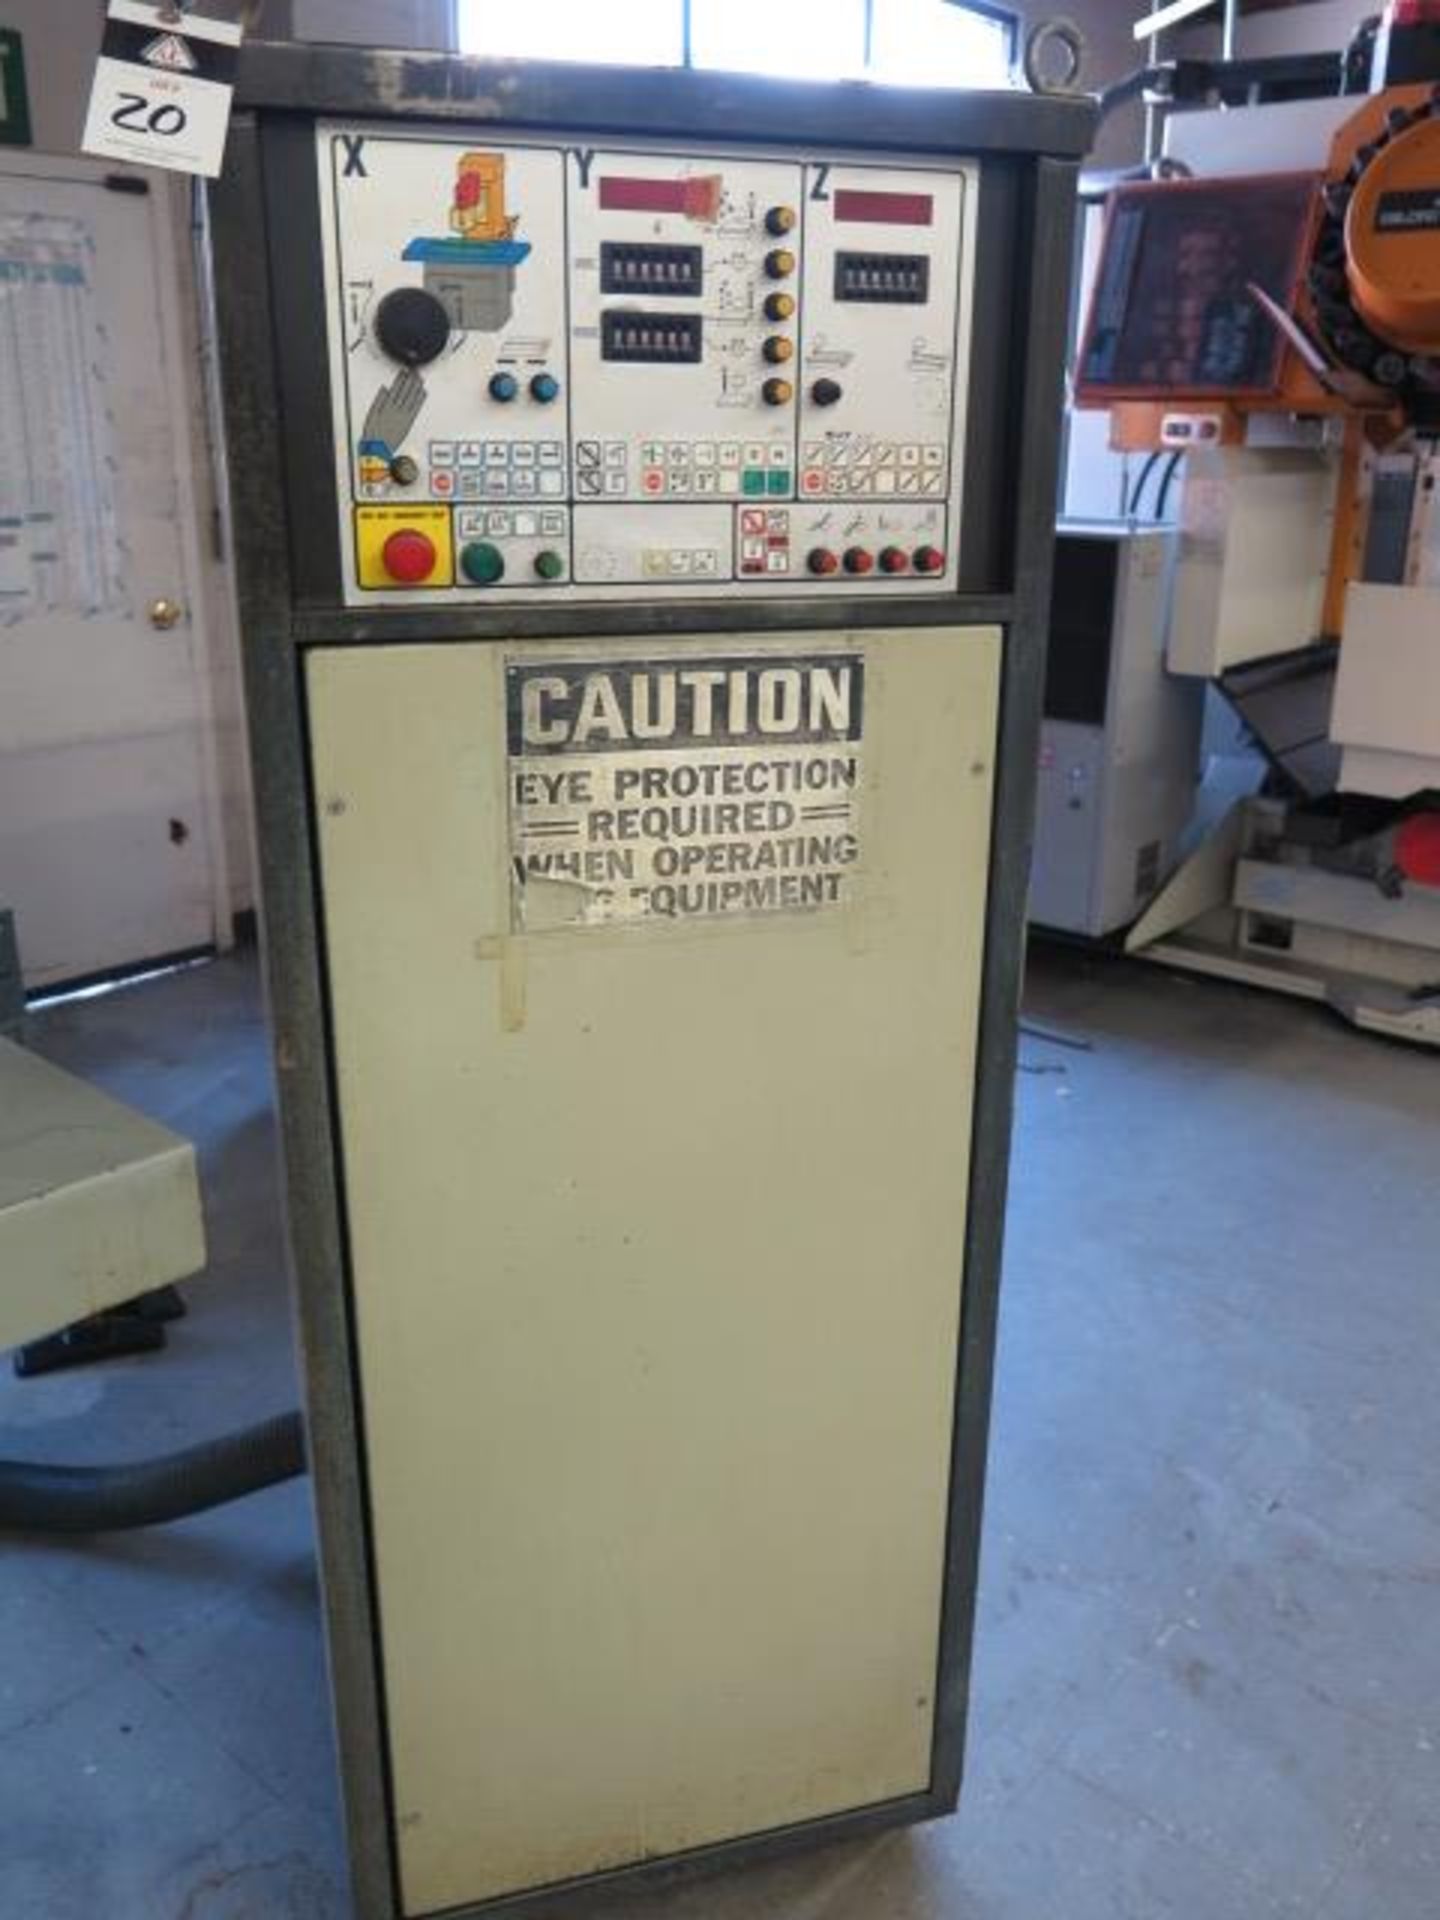 ELB type SWBE 010 NPC-K 20” x 40” Auto Surface Grinder s/n 209030 06 89 w/ ELB Controls, SOLD AS IS - Image 14 of 16